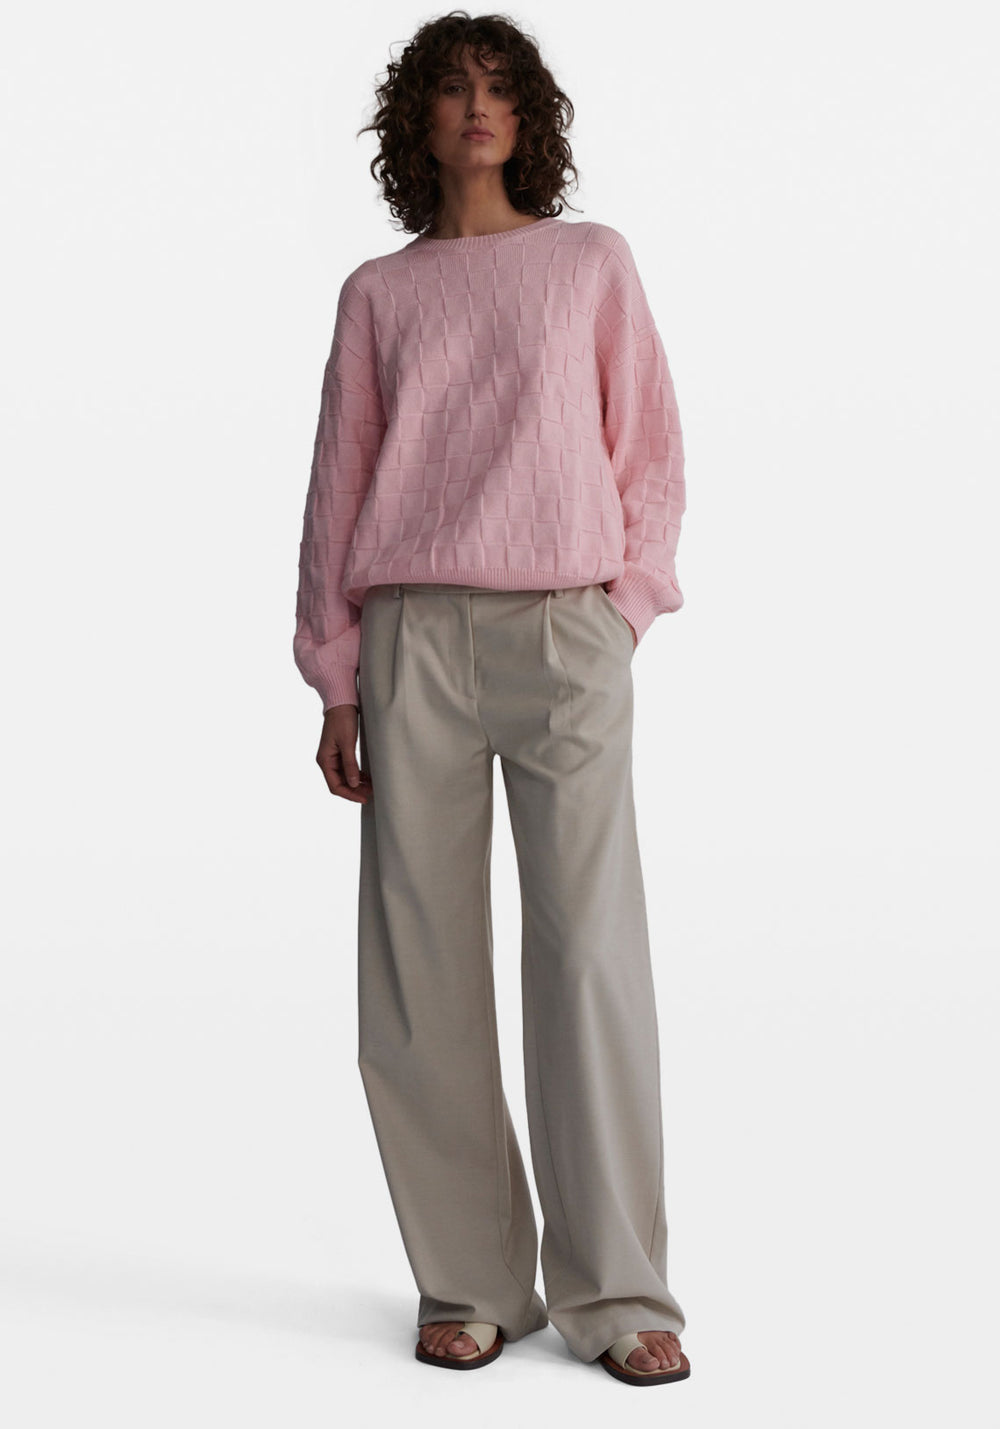 CHECKERBOARD SWEATER PALE PINK